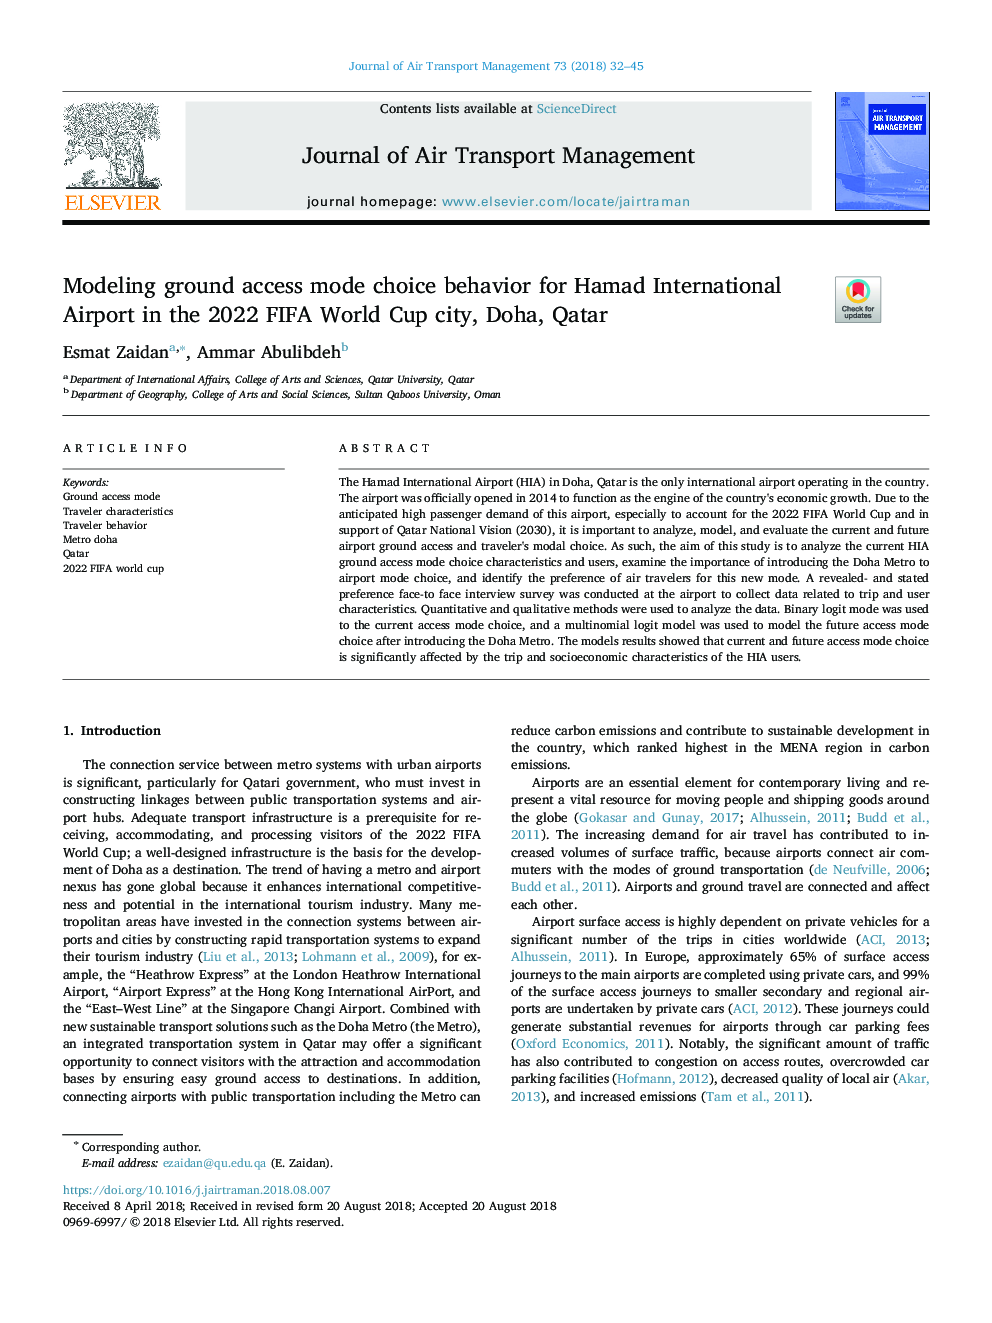 Modeling ground access mode choice behavior for Hamad International Airport in the 2022 FIFA World Cup city, Doha, Qatar